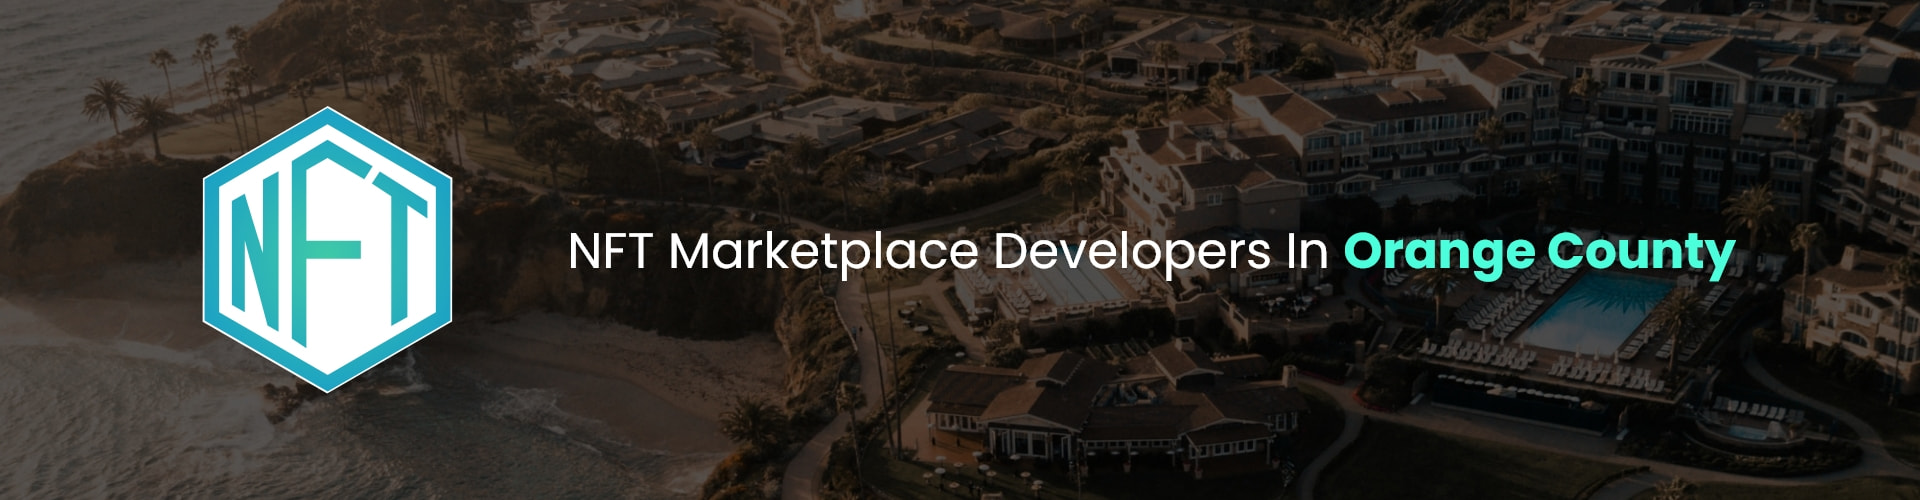 hire nft marketplace developers in orange county